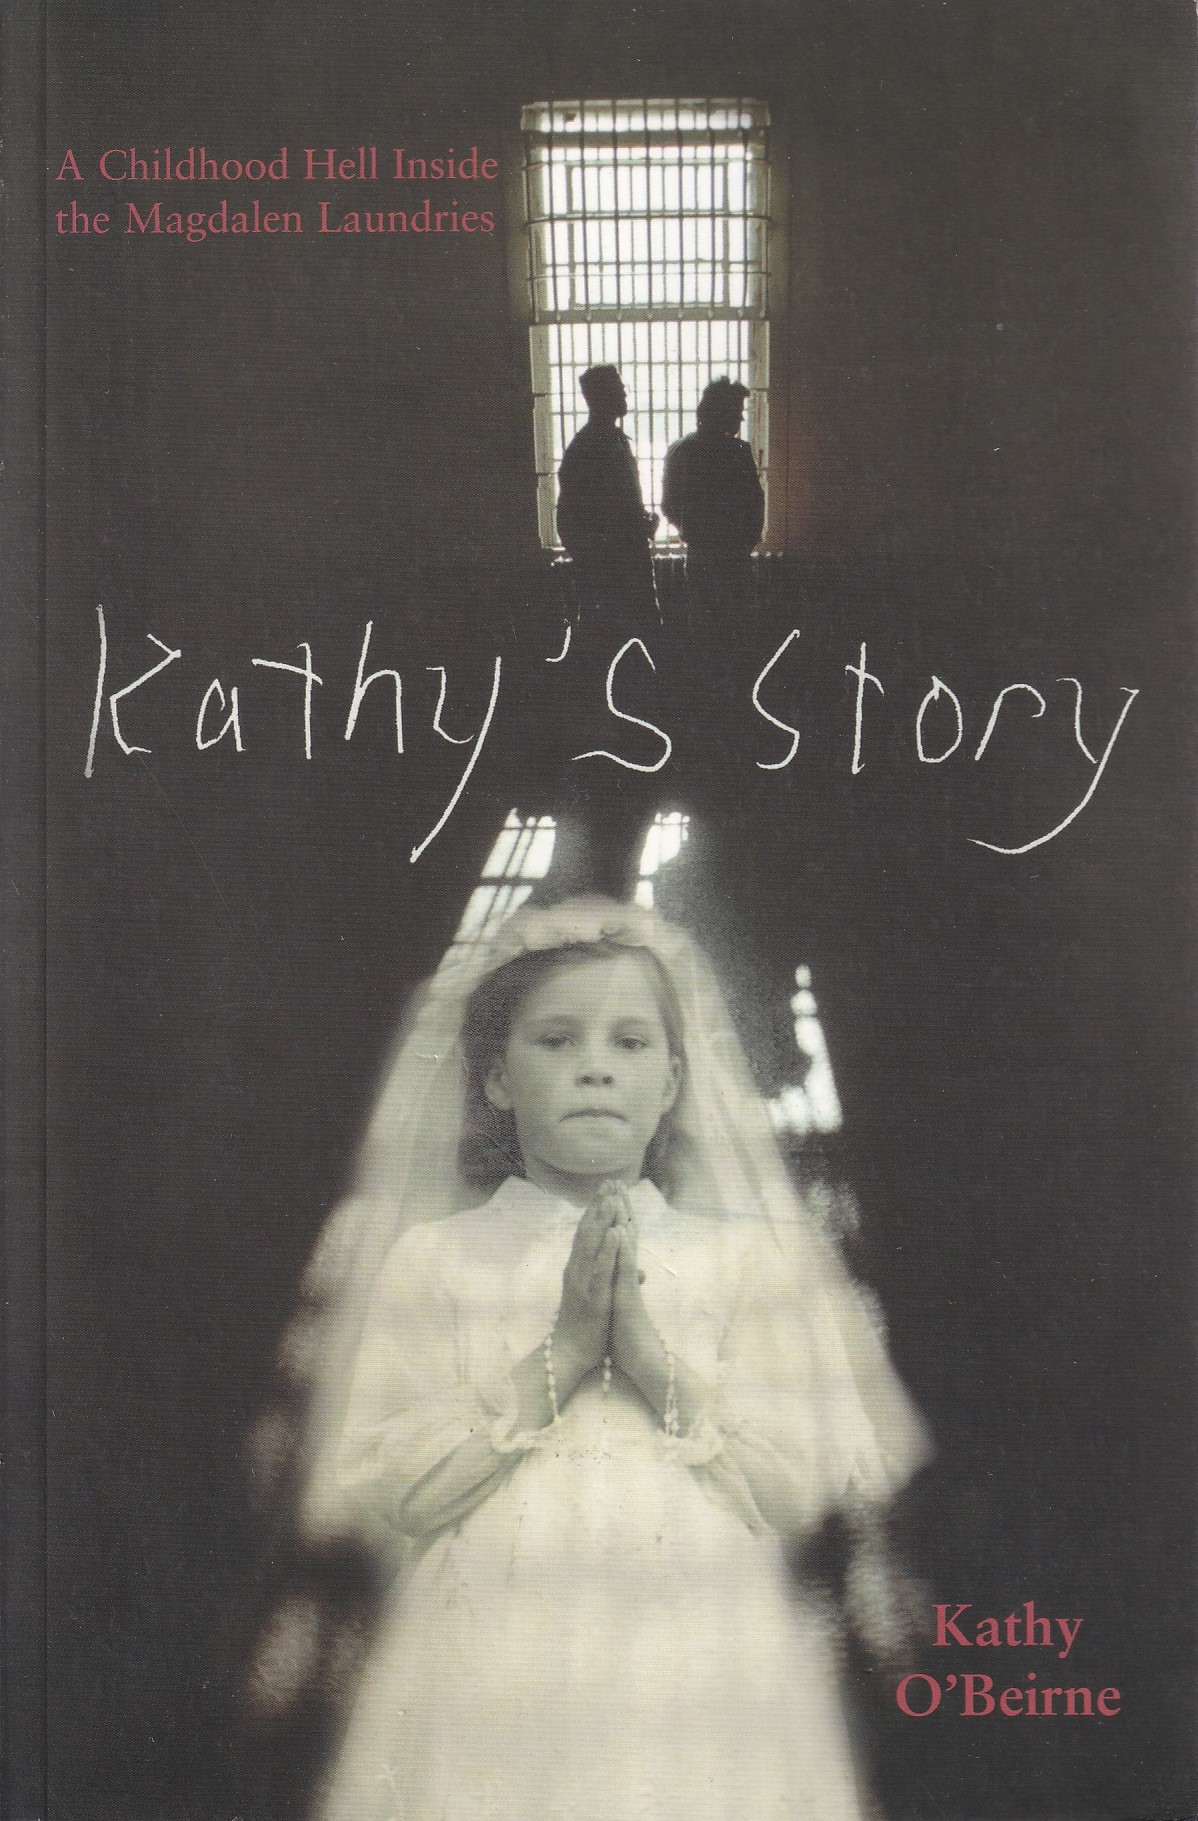 Kathy’s Story: A Childhood Hell Inside the Magdalen Laundries | Kathy O'Beirne | Charlie Byrne's